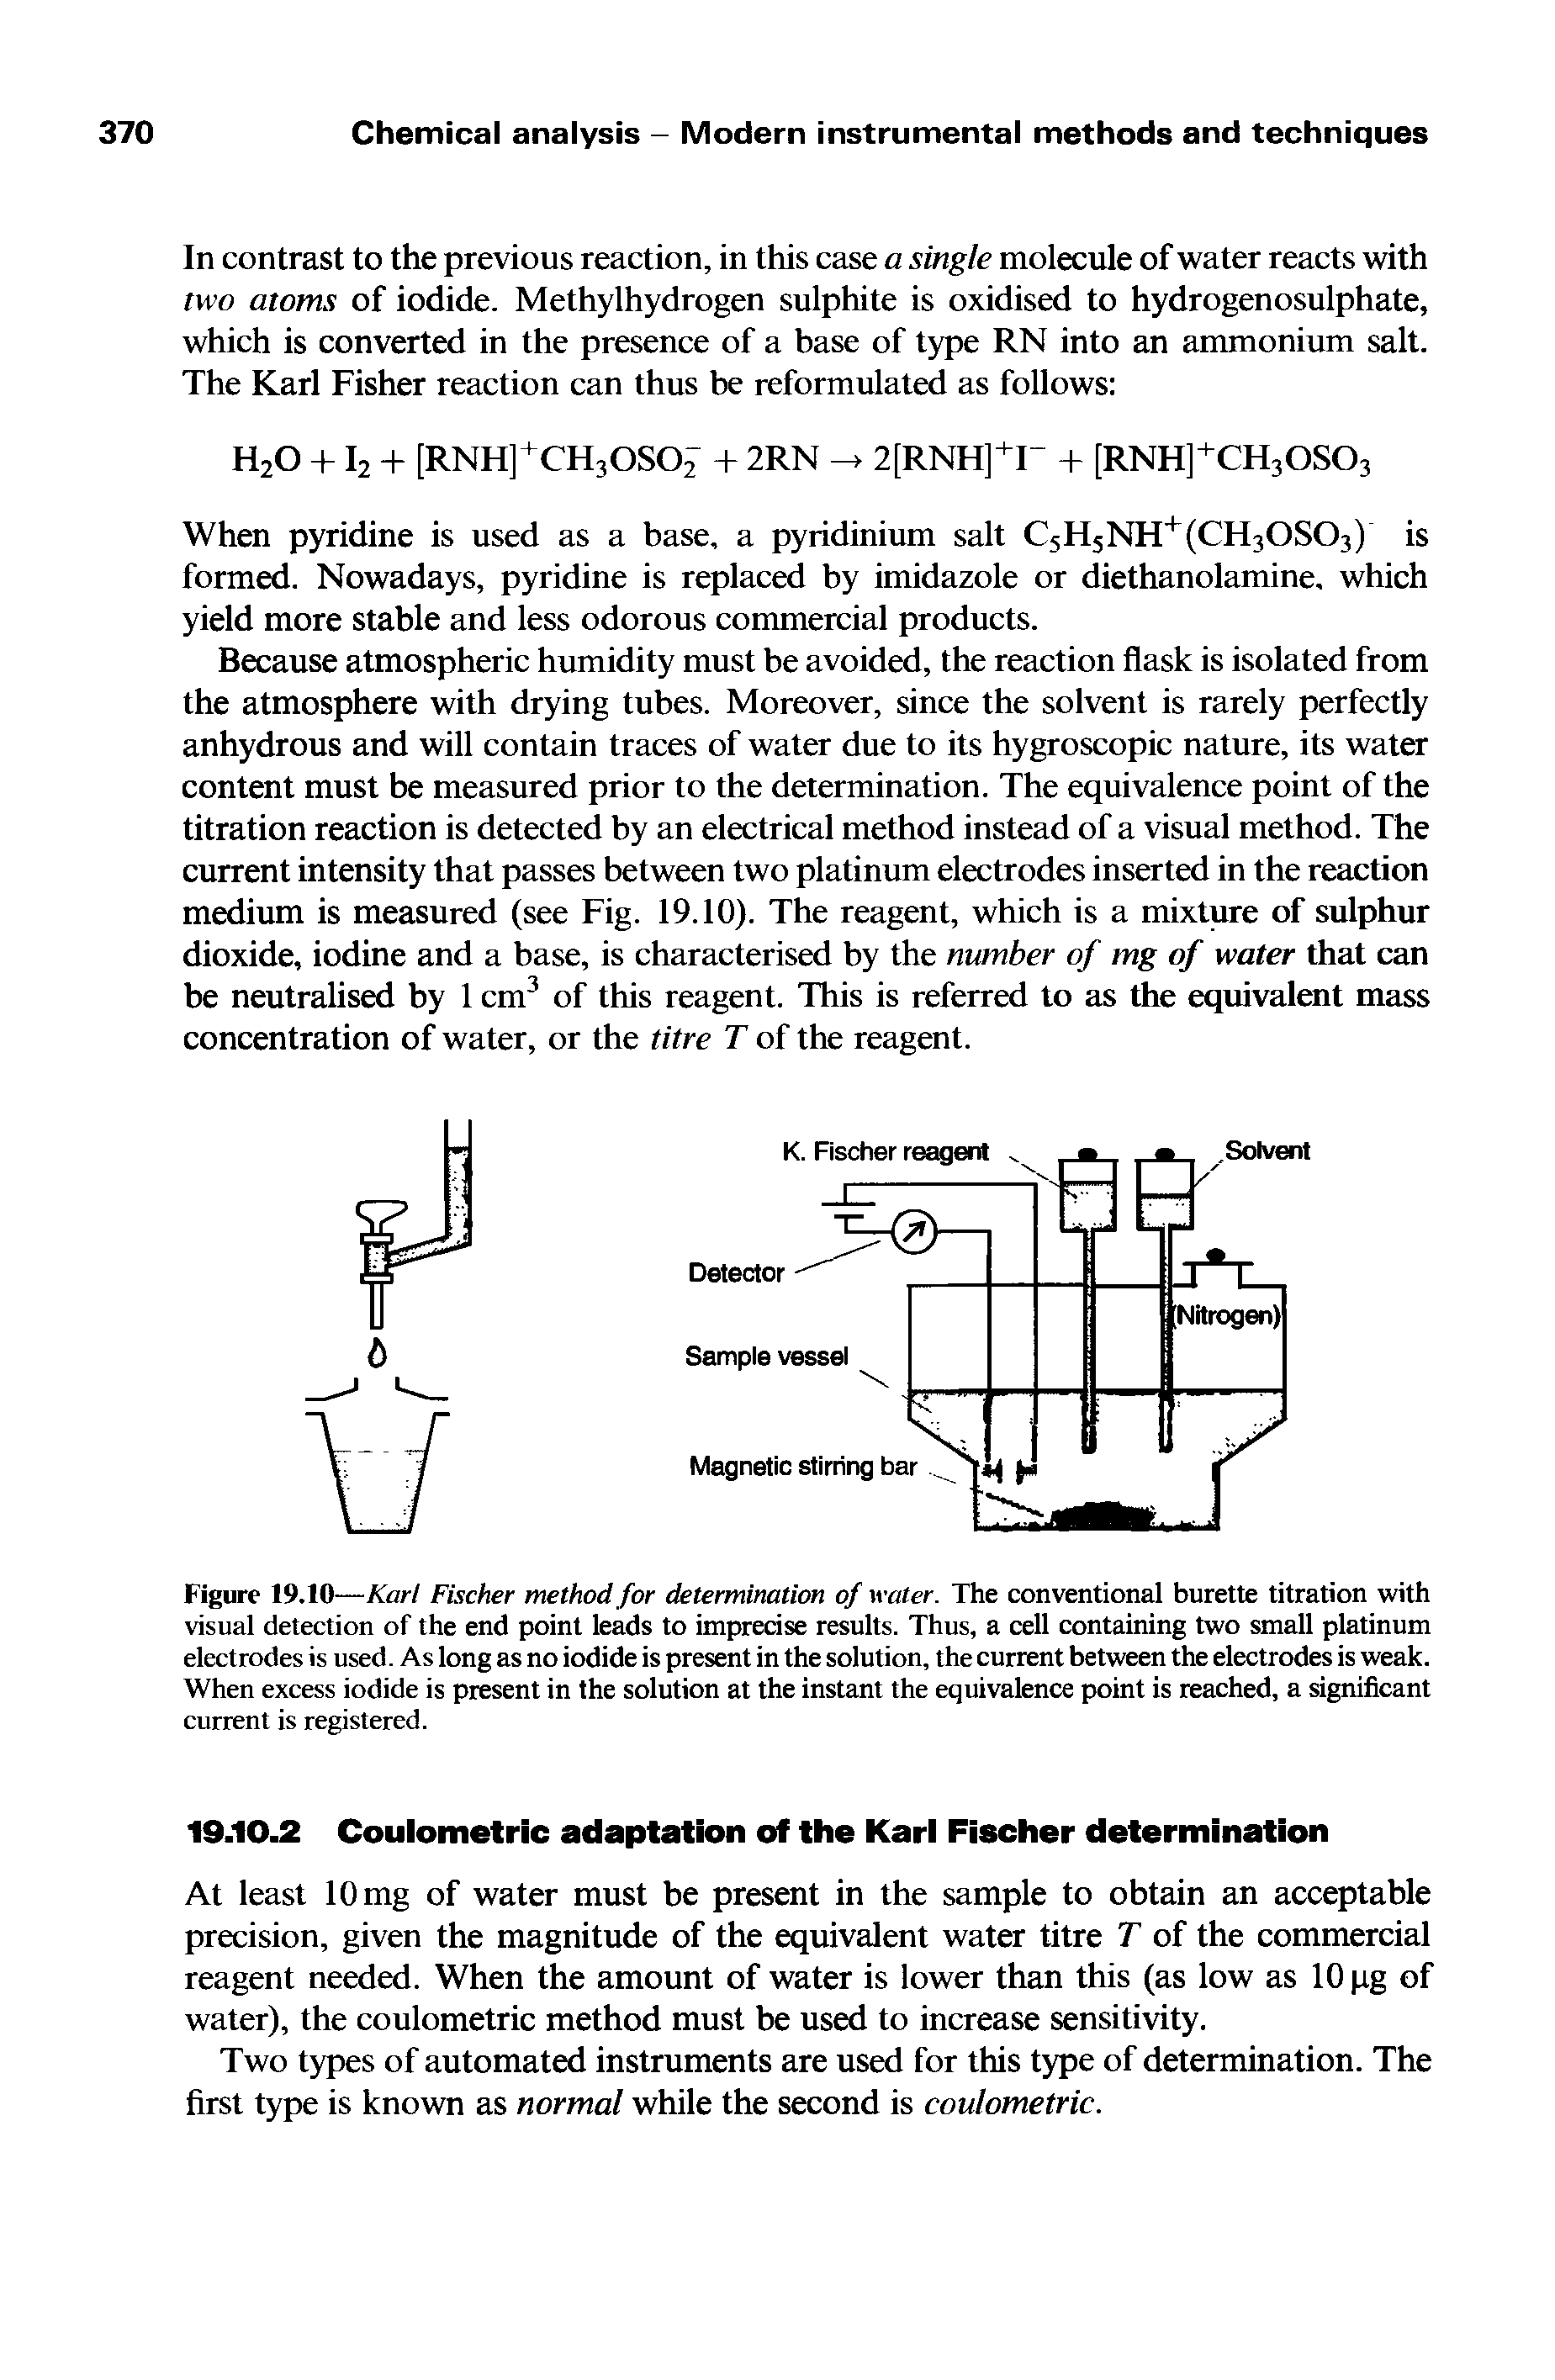 Figure 19.10—Karl Fischer method for determination of water. The conventional burette titration with visual detection of the end point leads to imprecise results. Thus, a cell containing two small platinum electrodes is used. As long as no iodide is present in the solution, the current between the electrodes is weak. When excess iodide is present in the solution at the instant the equivalence point is reached, a significant current is registered.